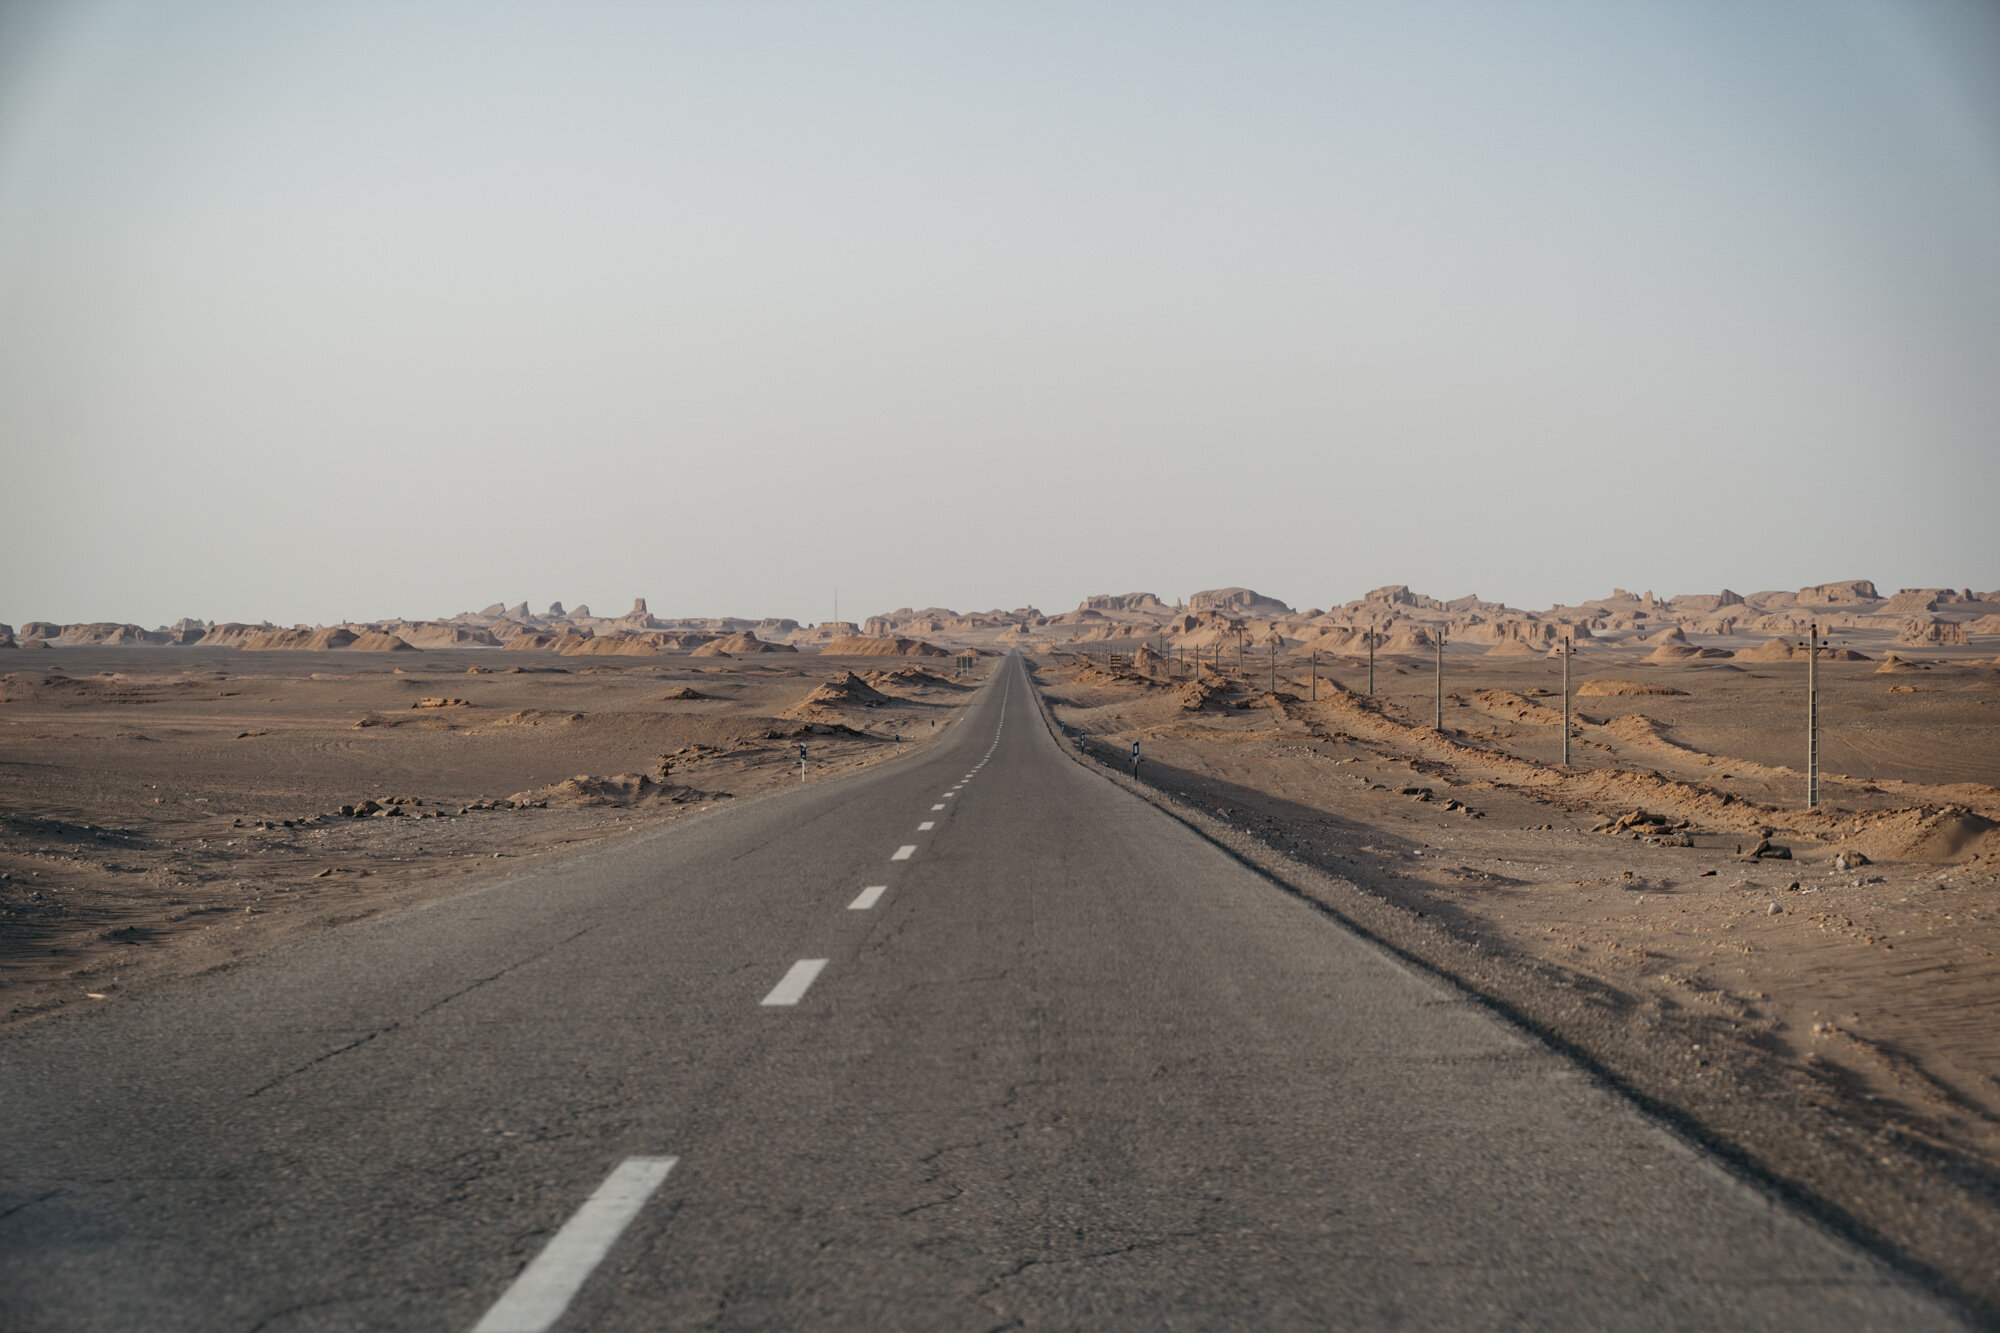  The road we took into the desert 